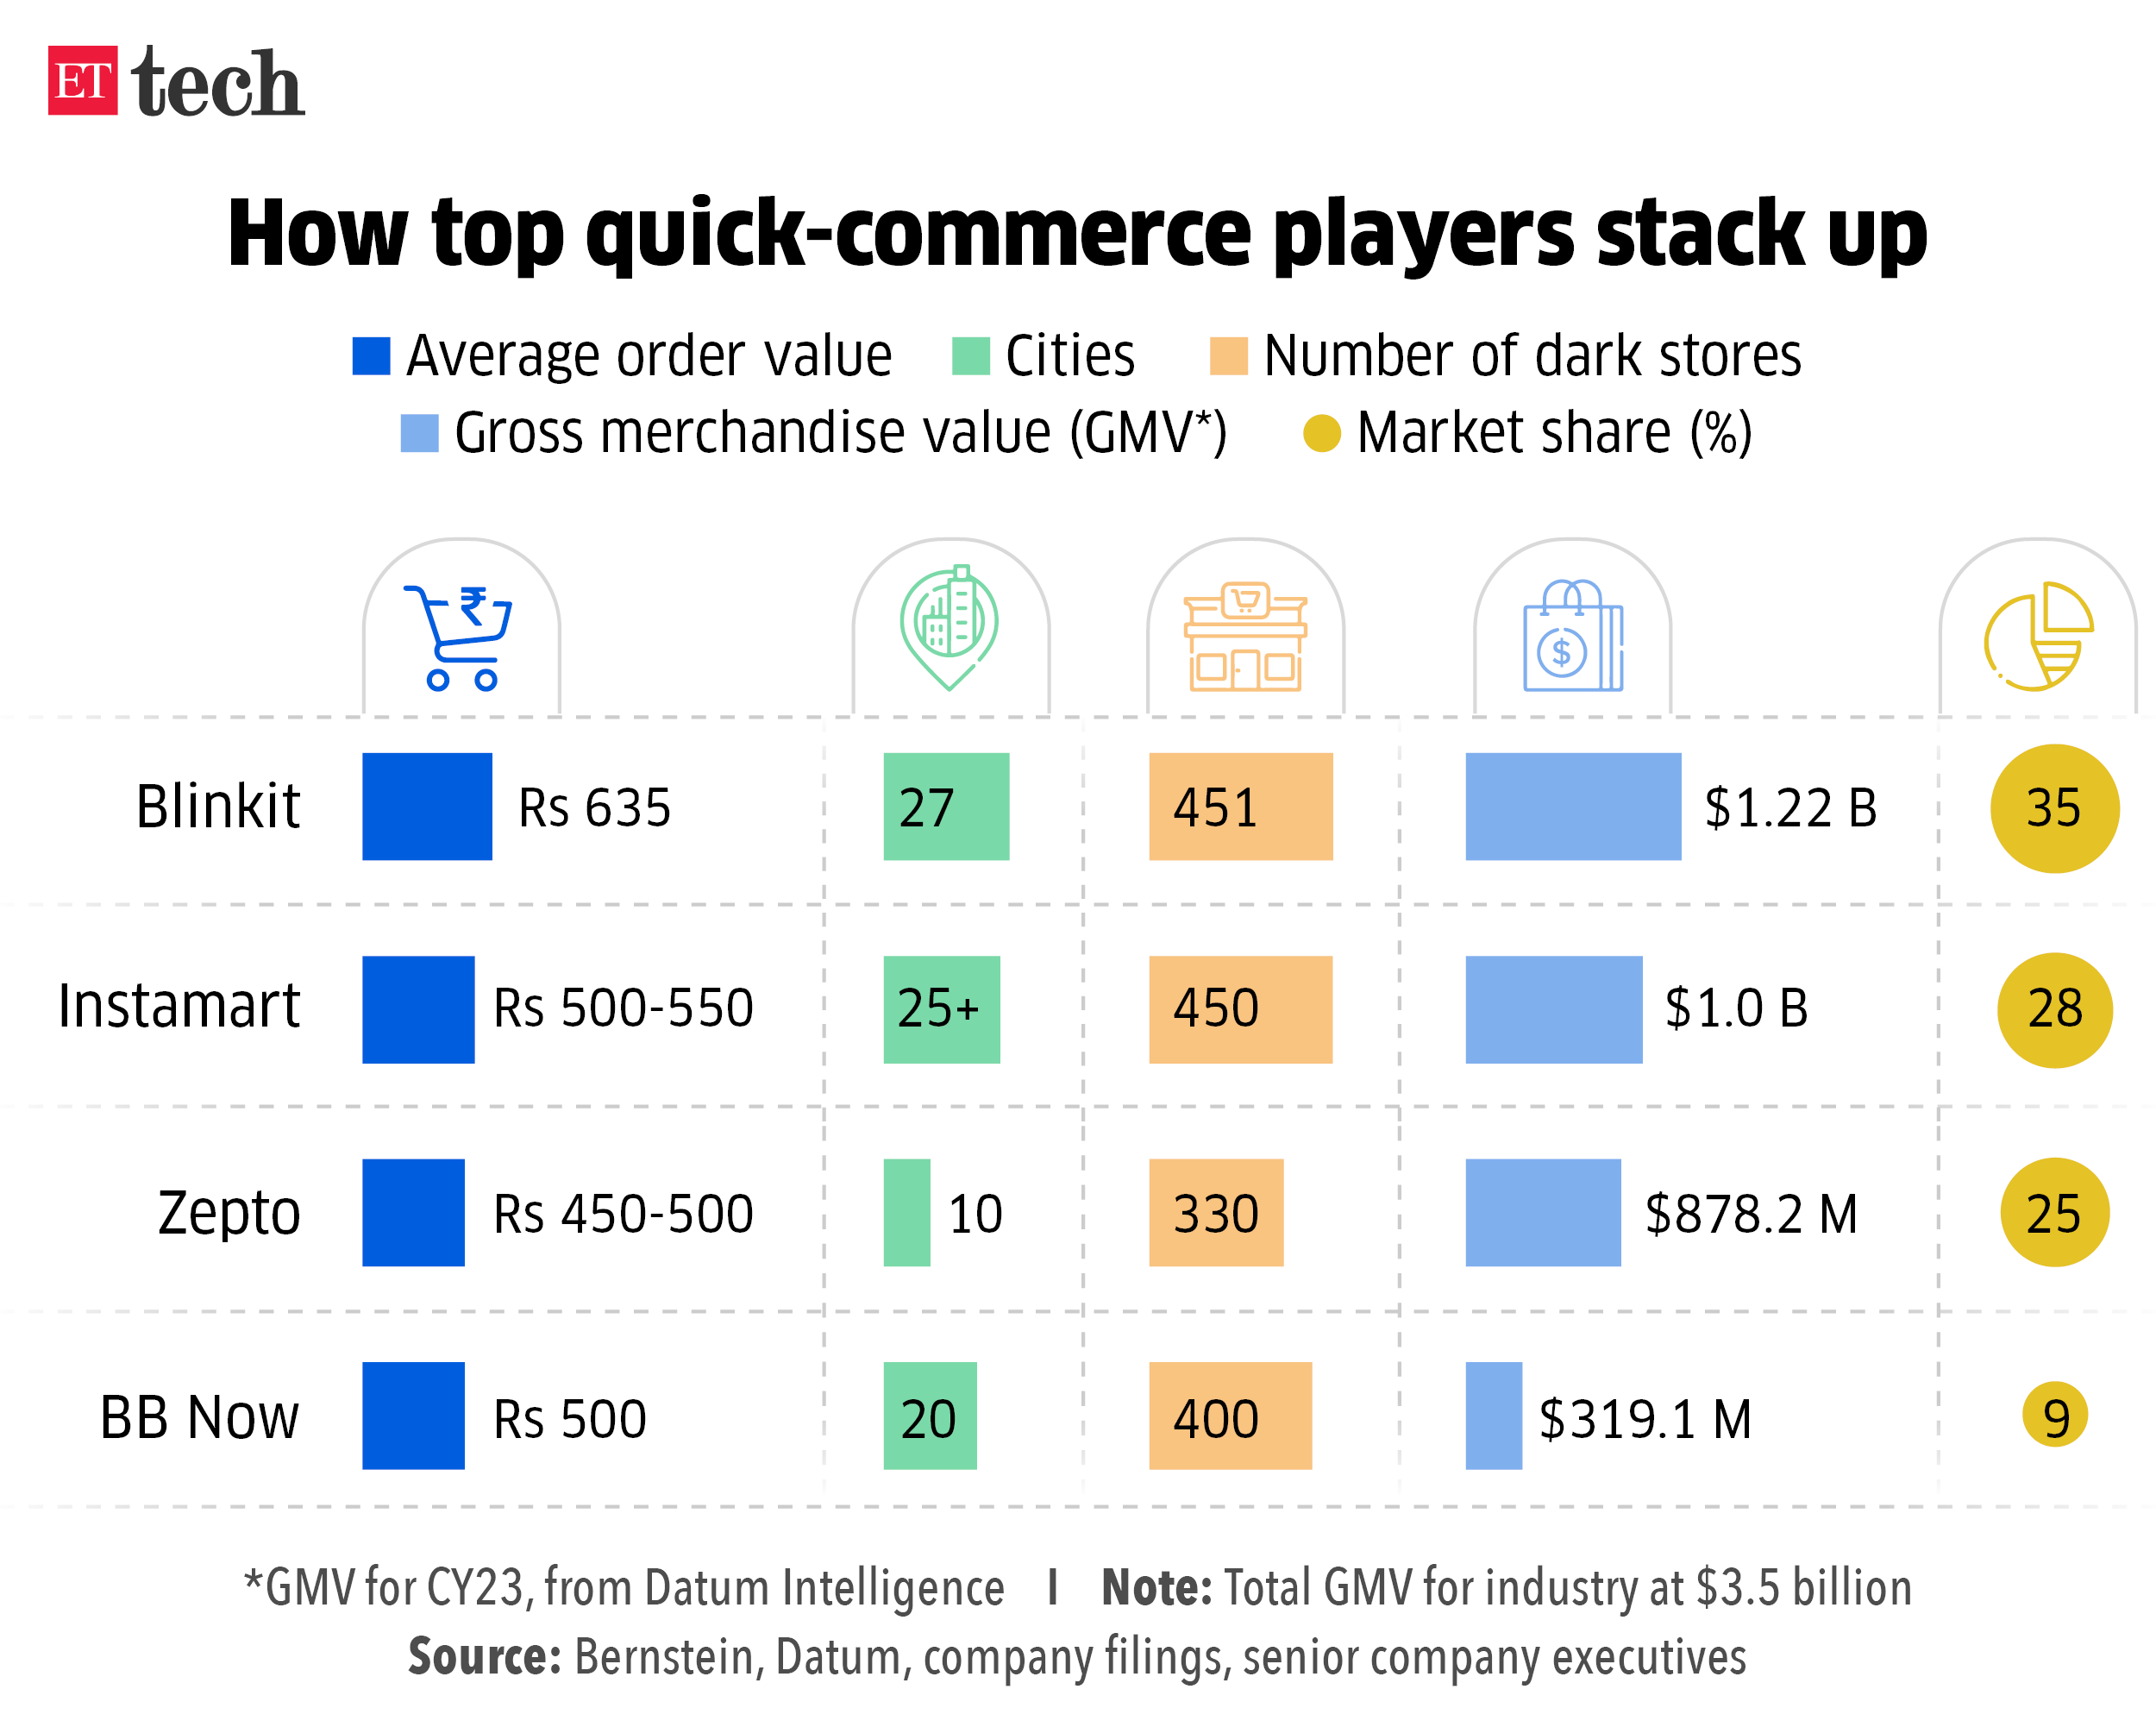 Top quick commerce players